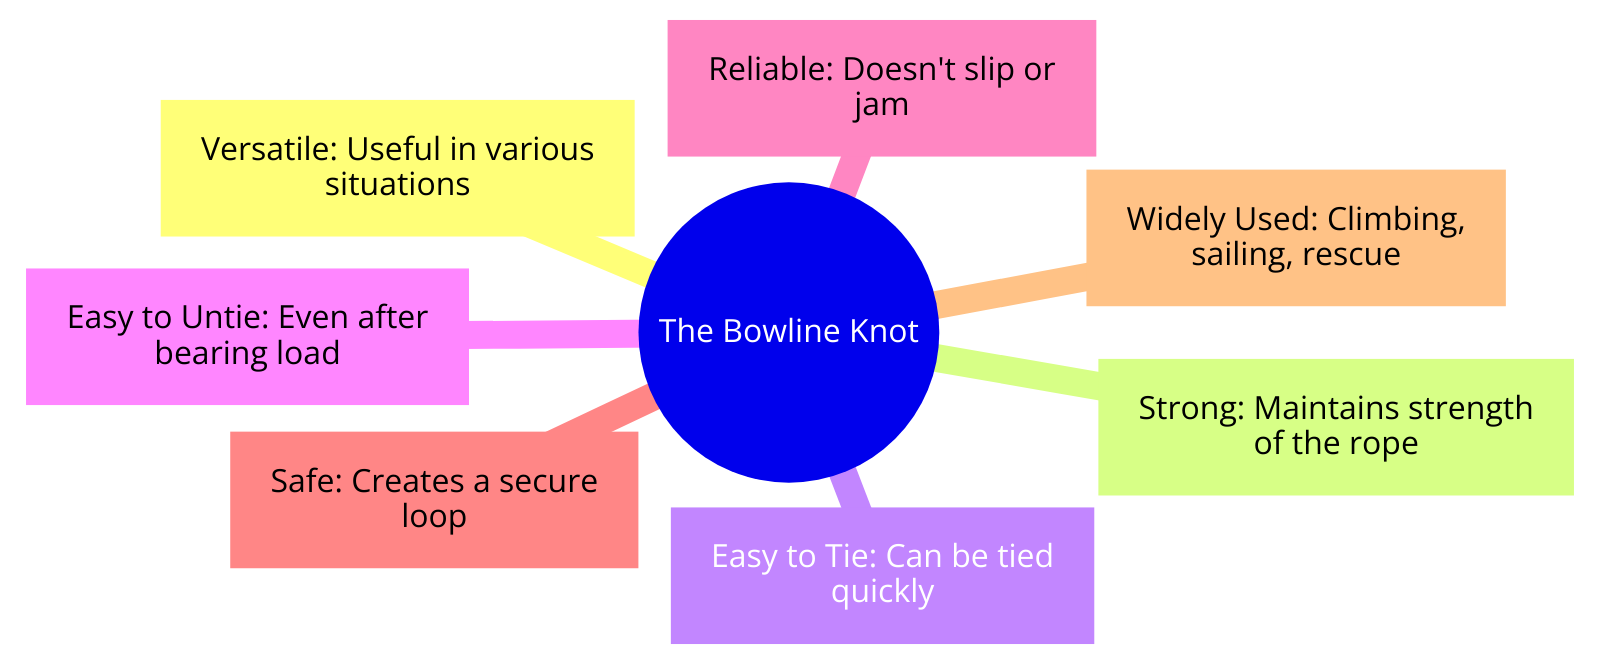 why the bowline knot is a great knot for various purposes